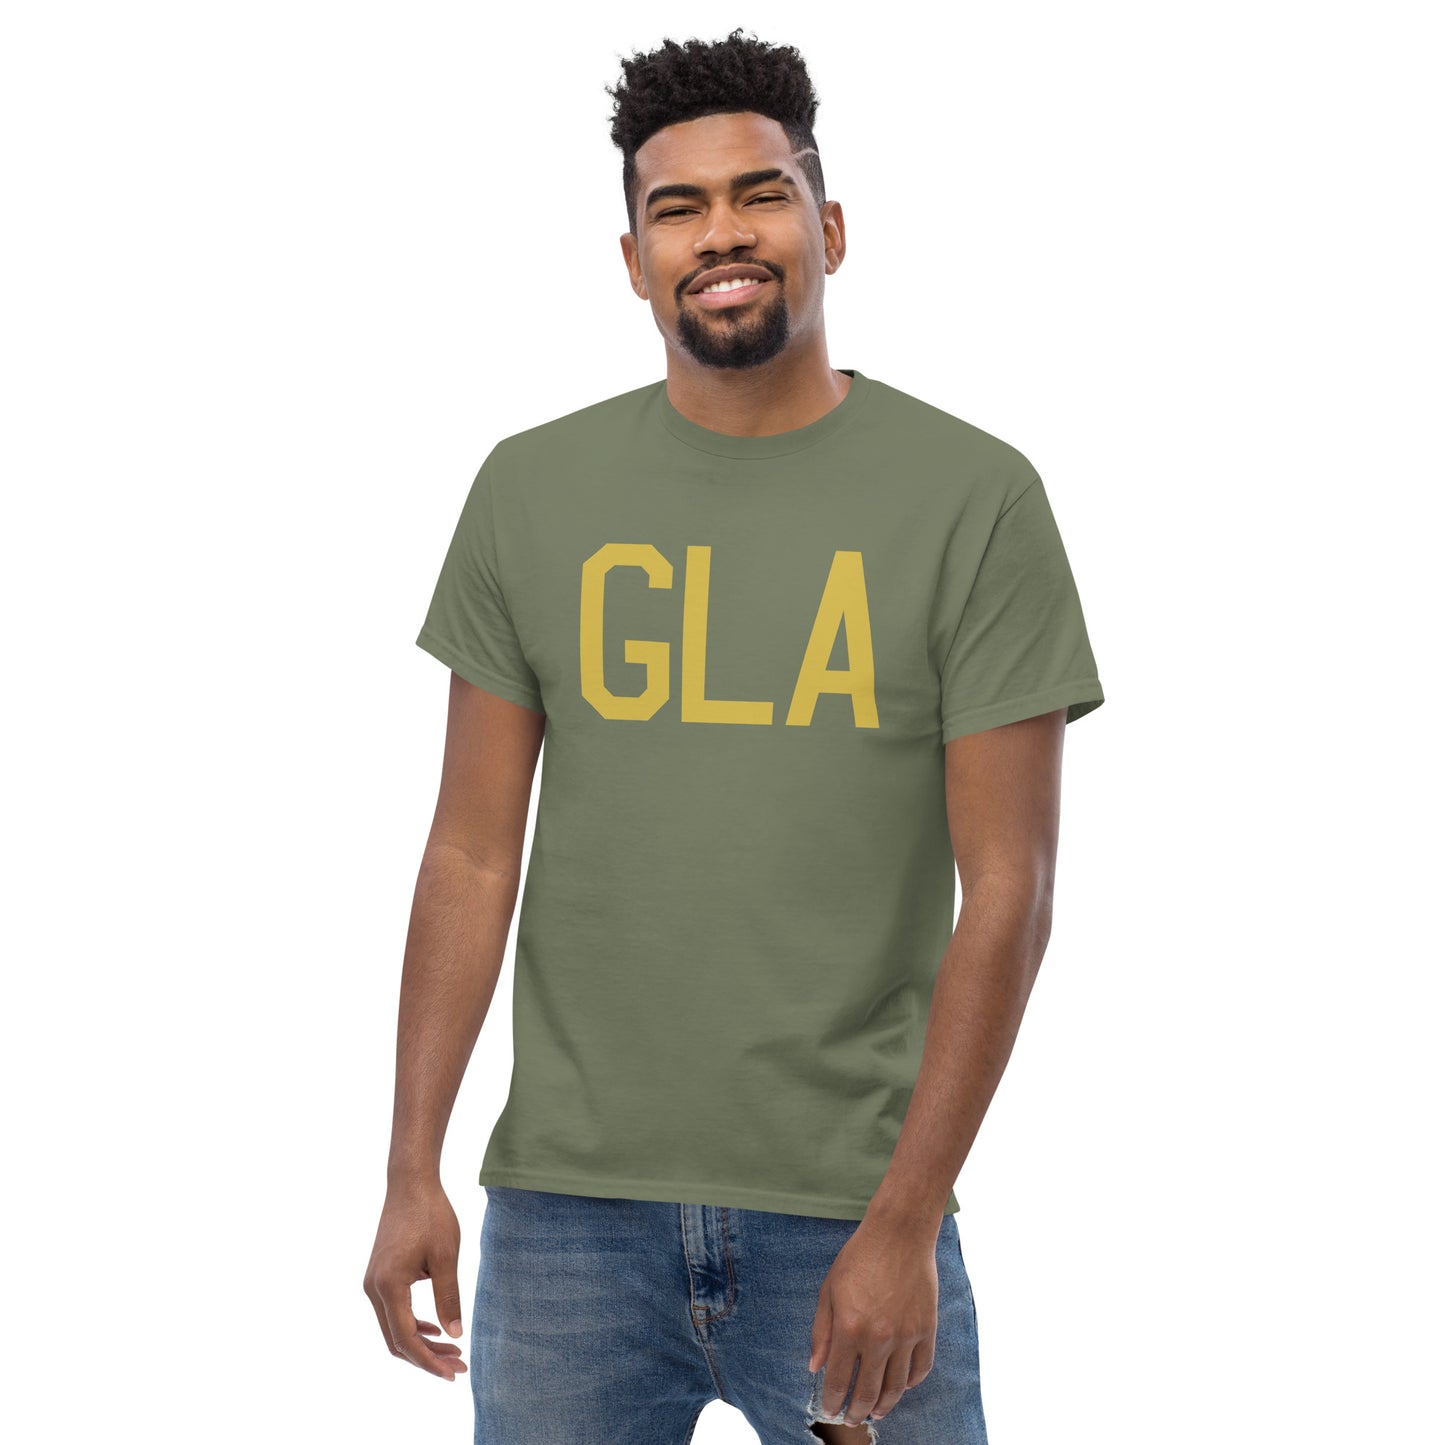 Aviation Enthusiast Men's Tee - Old Gold Graphic • GLA Glasgow • YHM Designs - Image 07